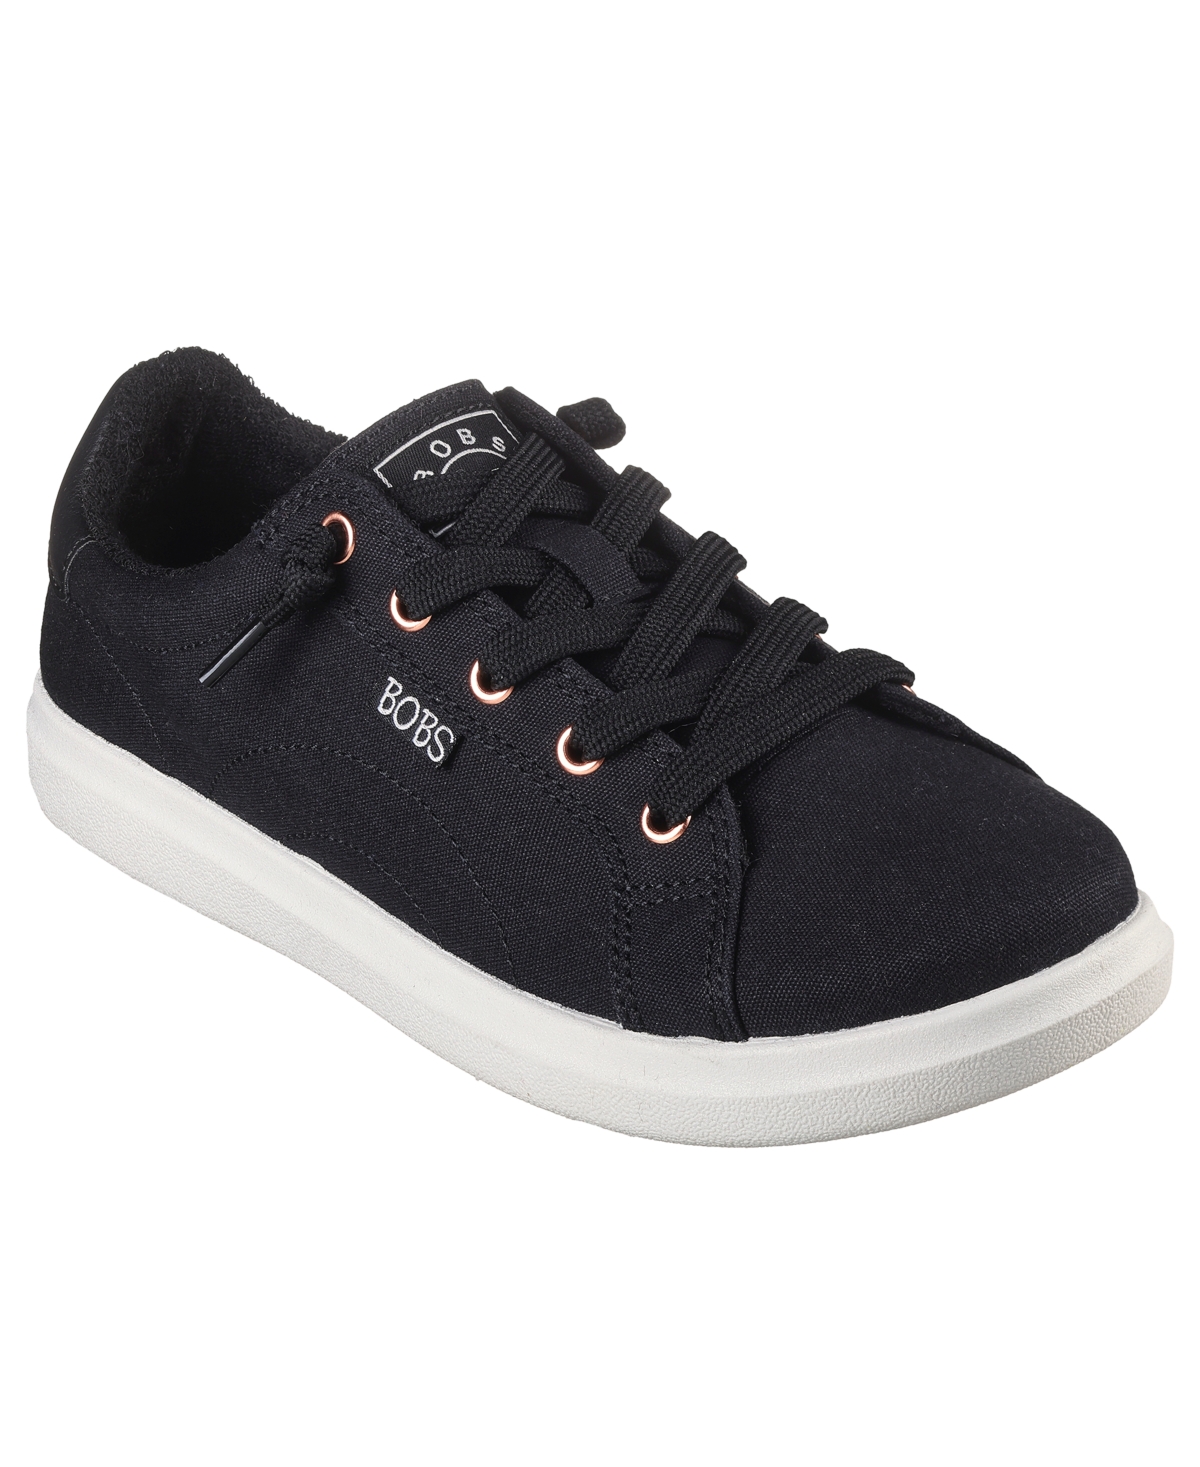 Women's Bobs - D Vine Casual Sneakers from Finish Line - Black